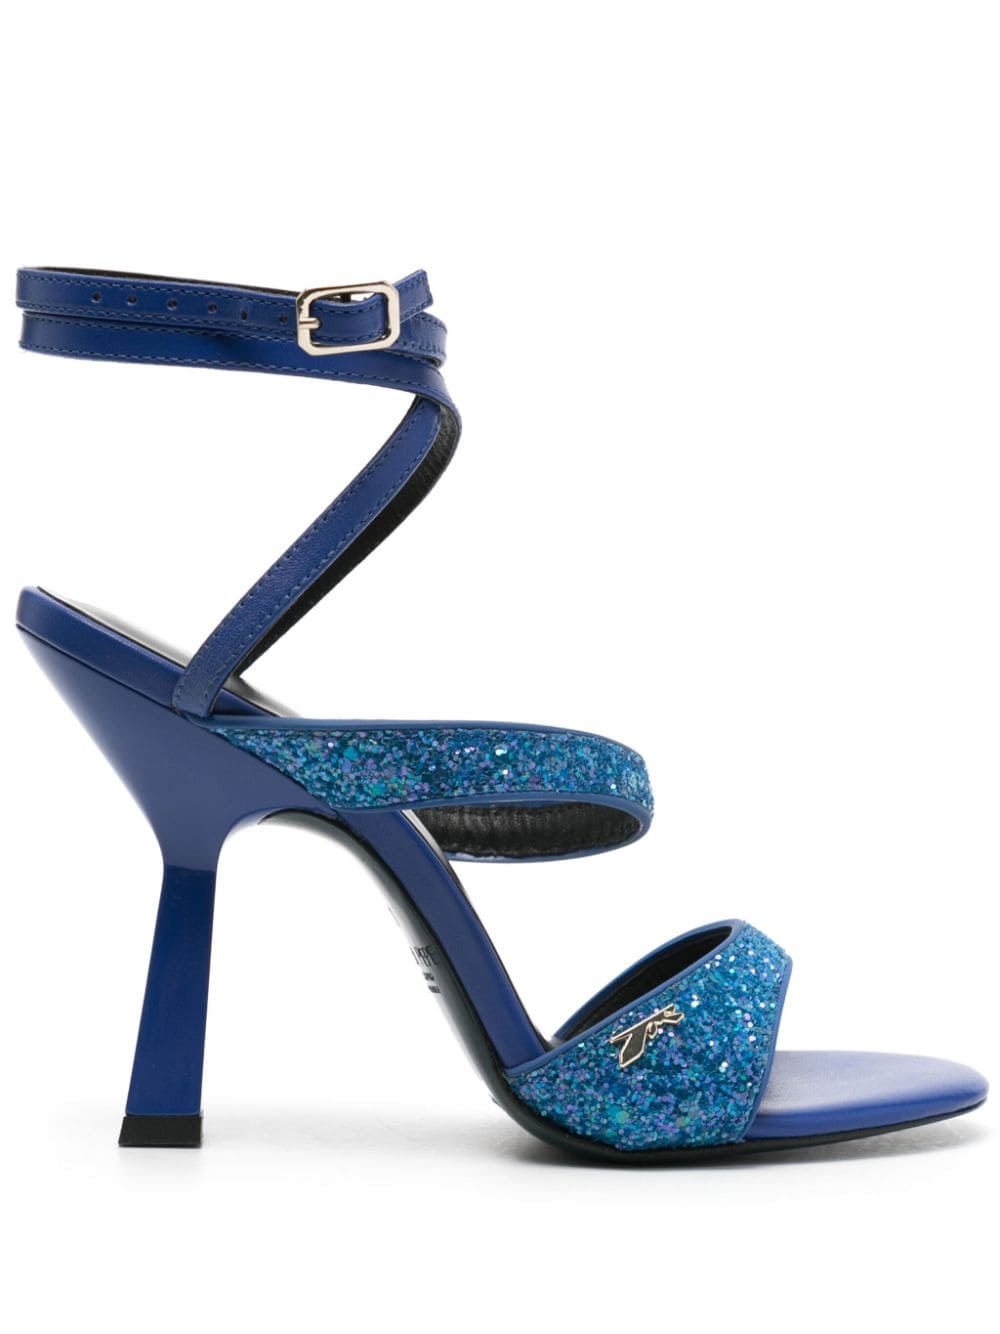 Patrizia Pepe 100mm Glittered Leather Sandals In Blue